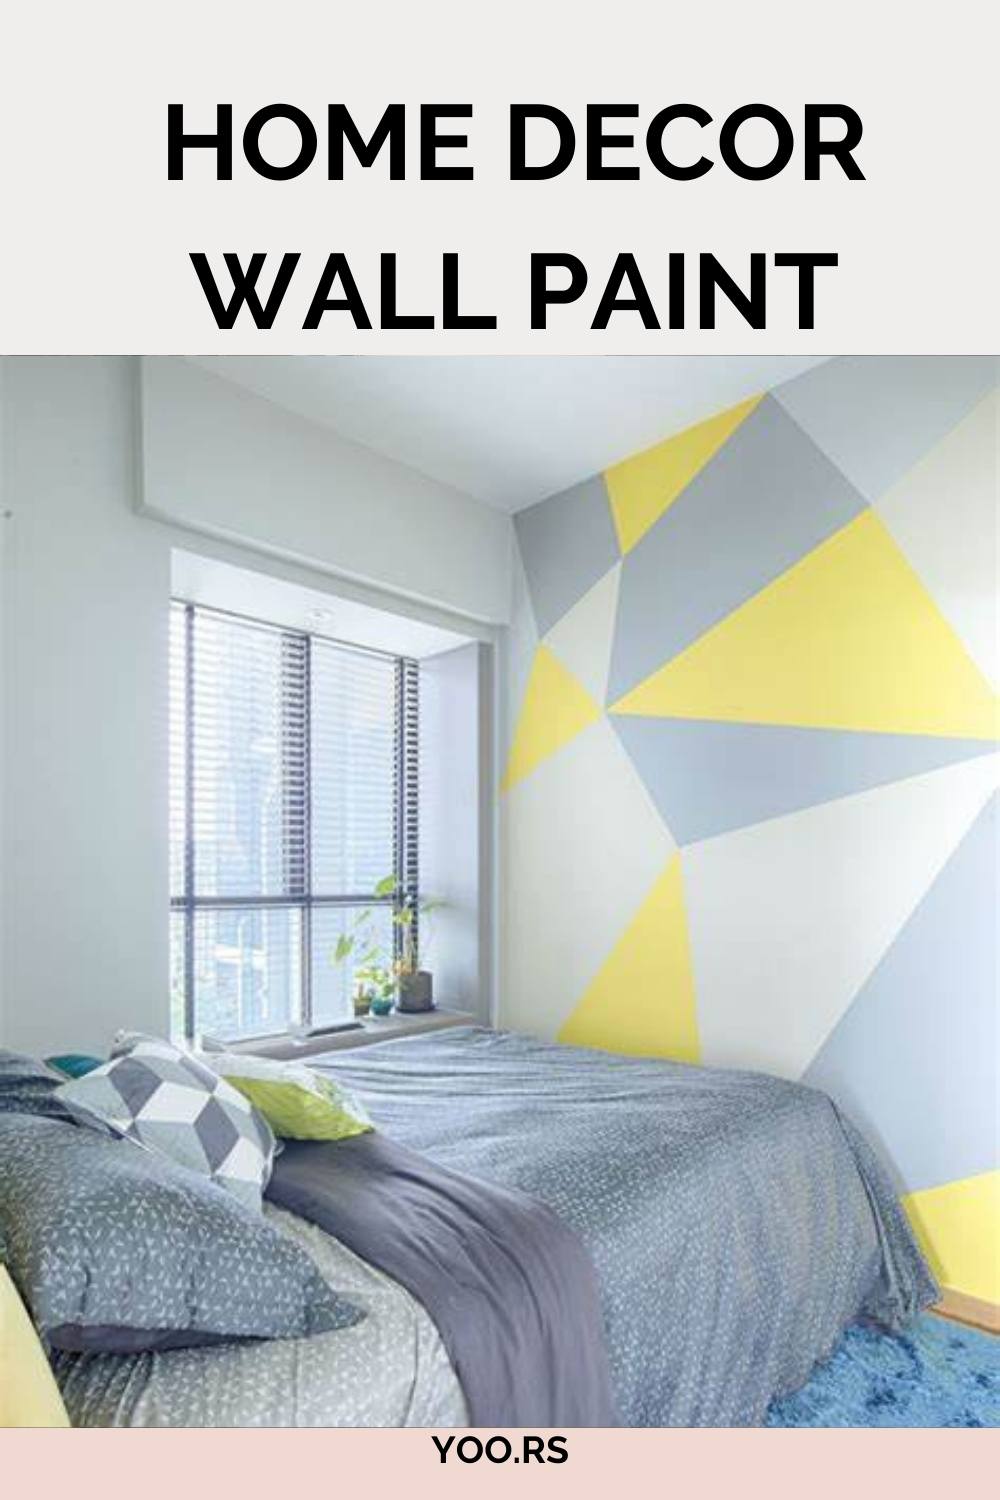 Home decor wall paint